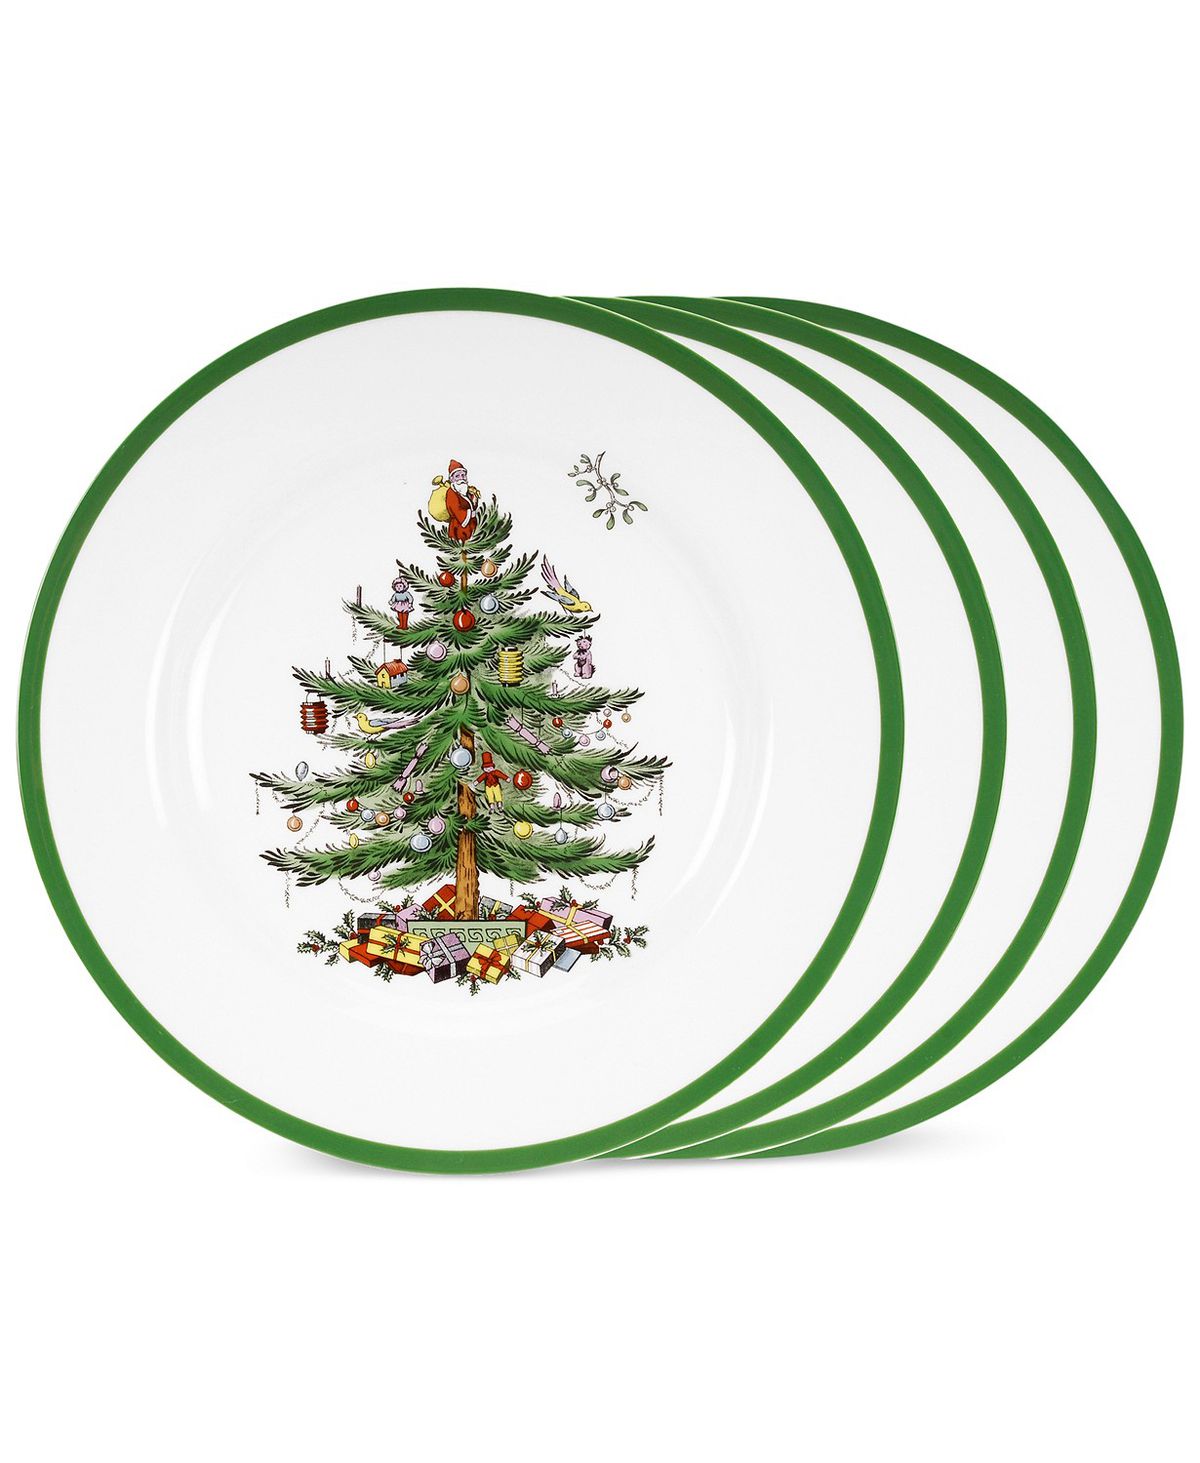 Macy’s Is Having A Huge Sale on Spode Dinnerware—Now Is the Time To Finally Finish Up Your ...